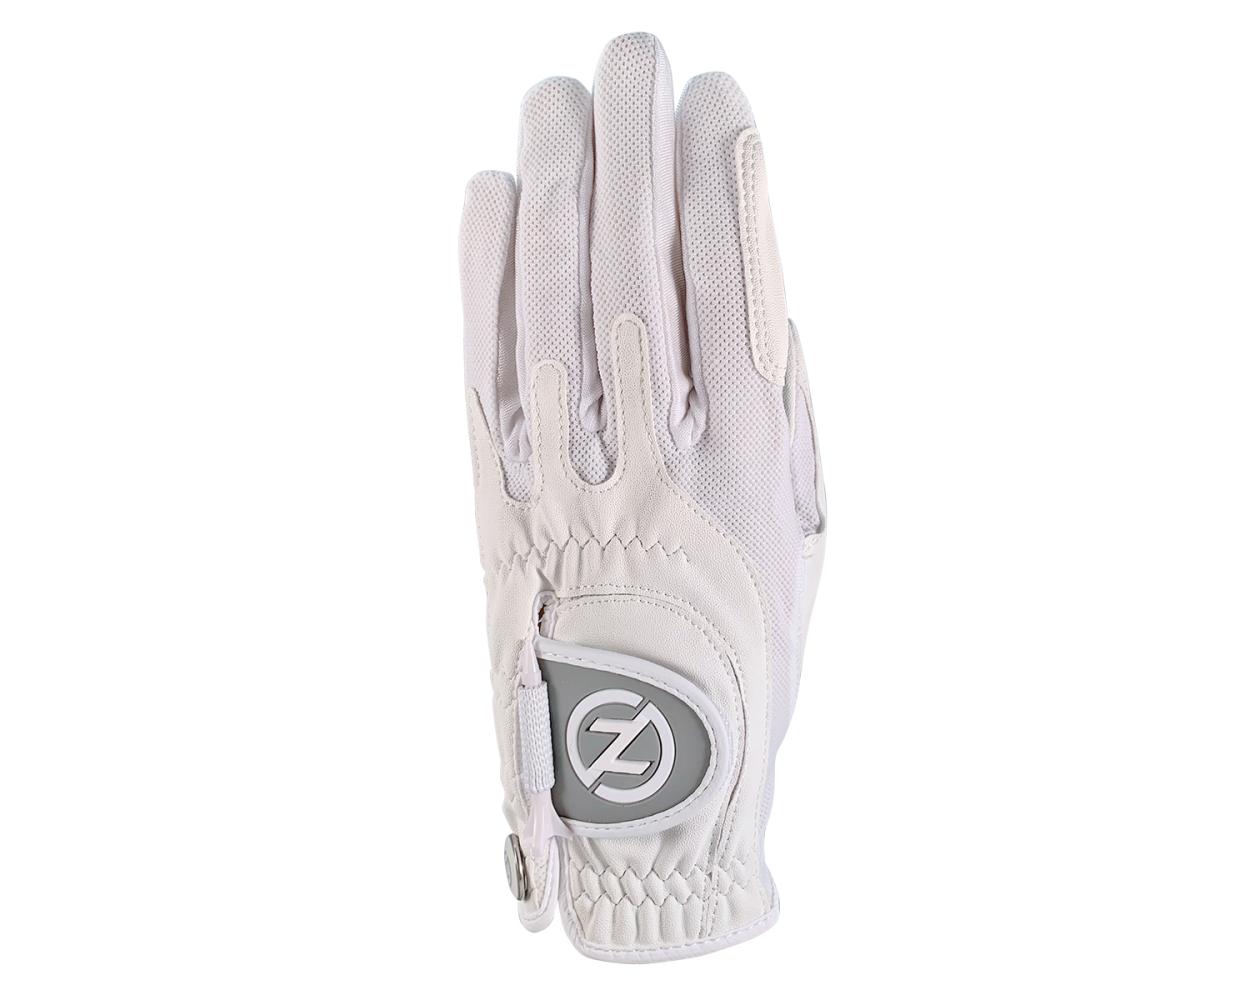 Zero Friction Women's Compression-Fit Synthetic Golf Glove - LH Universal Fit One Size